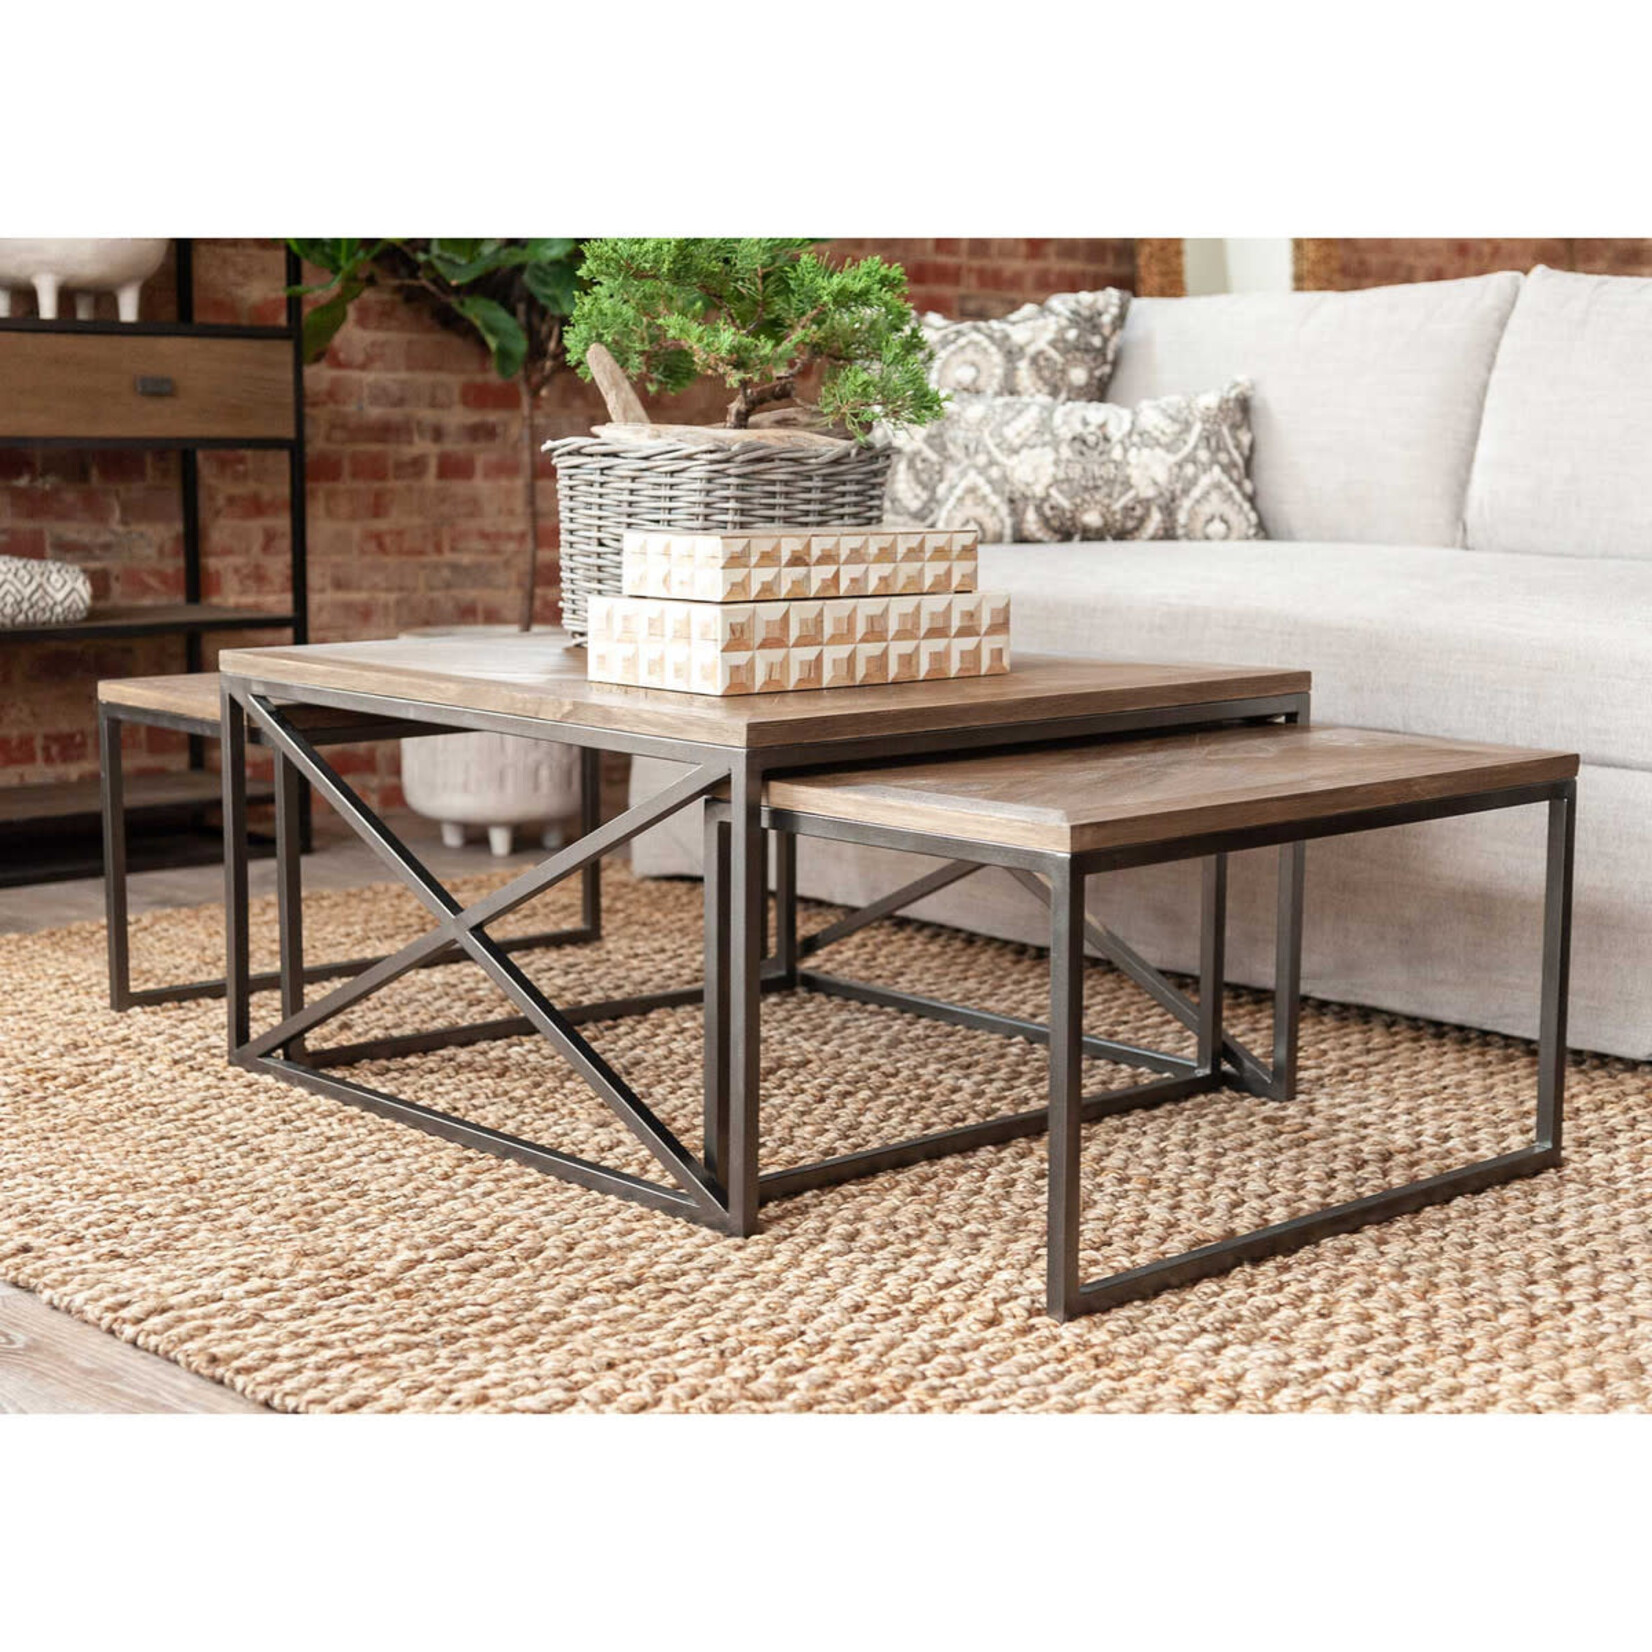 Mickler & Co. Iron & Wood Coffee Table Set